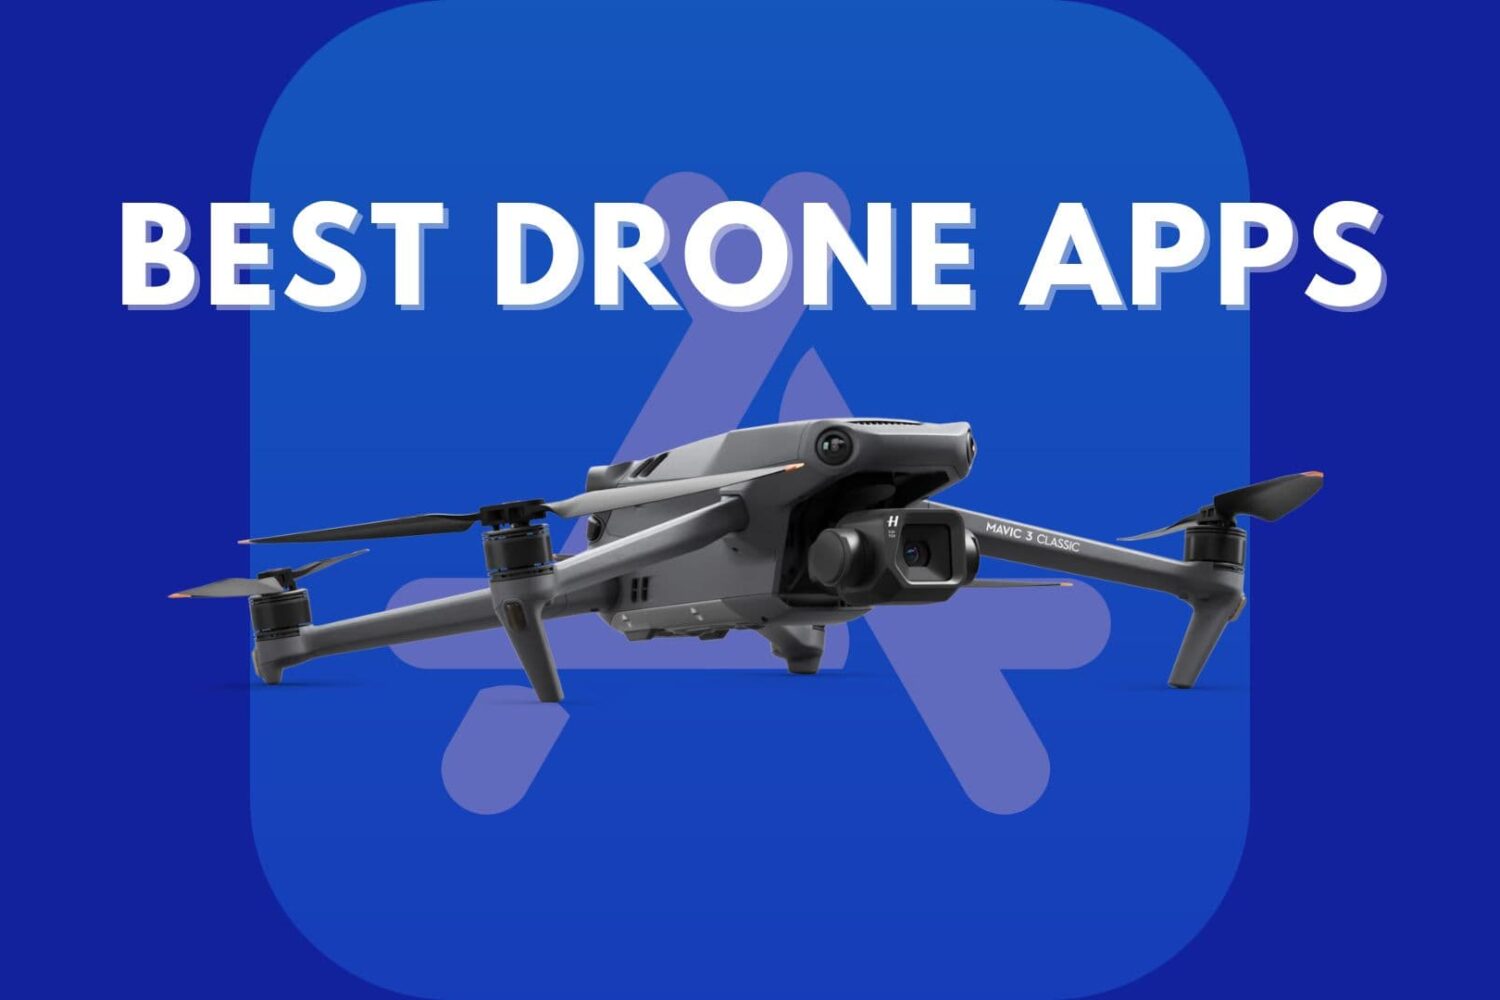 Best iPhone apps for drone flying.